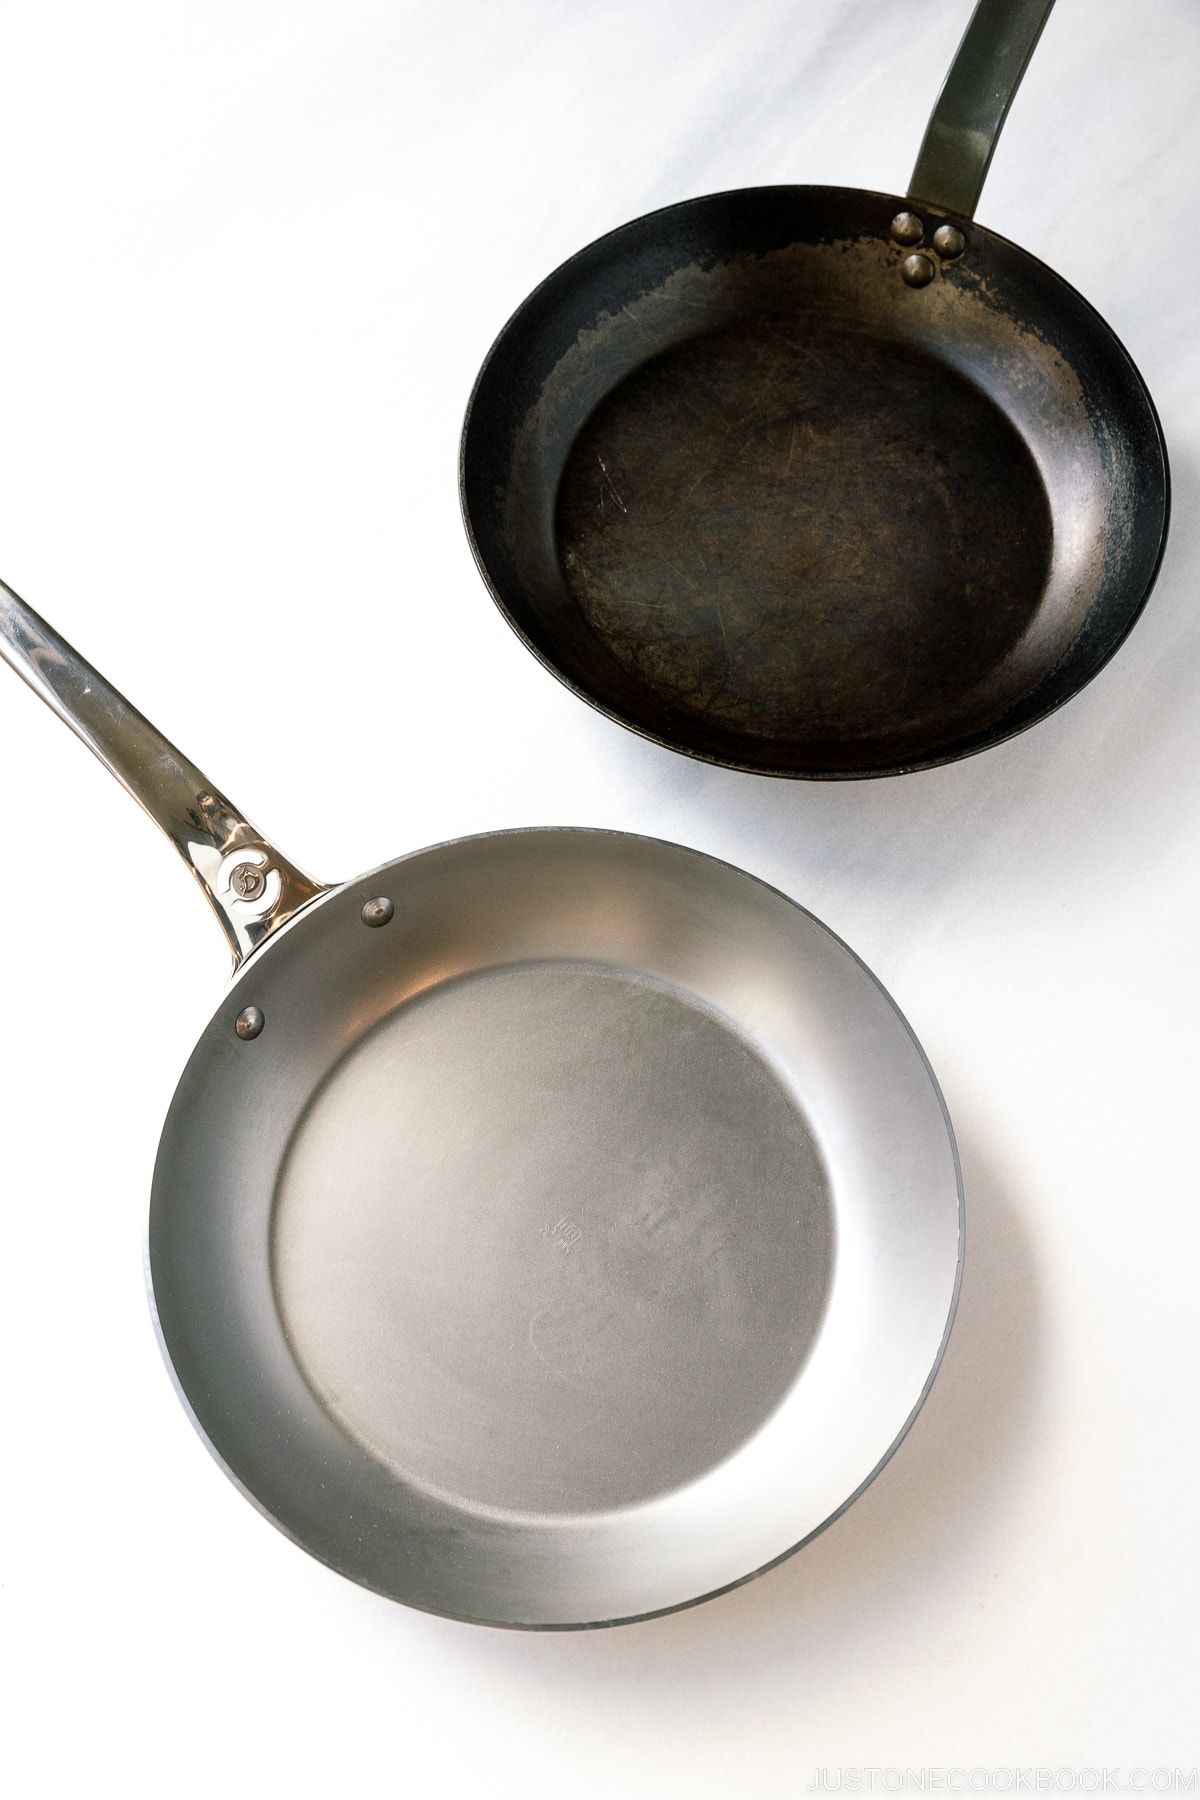 new and well used de Buyer carbon steel fry pan